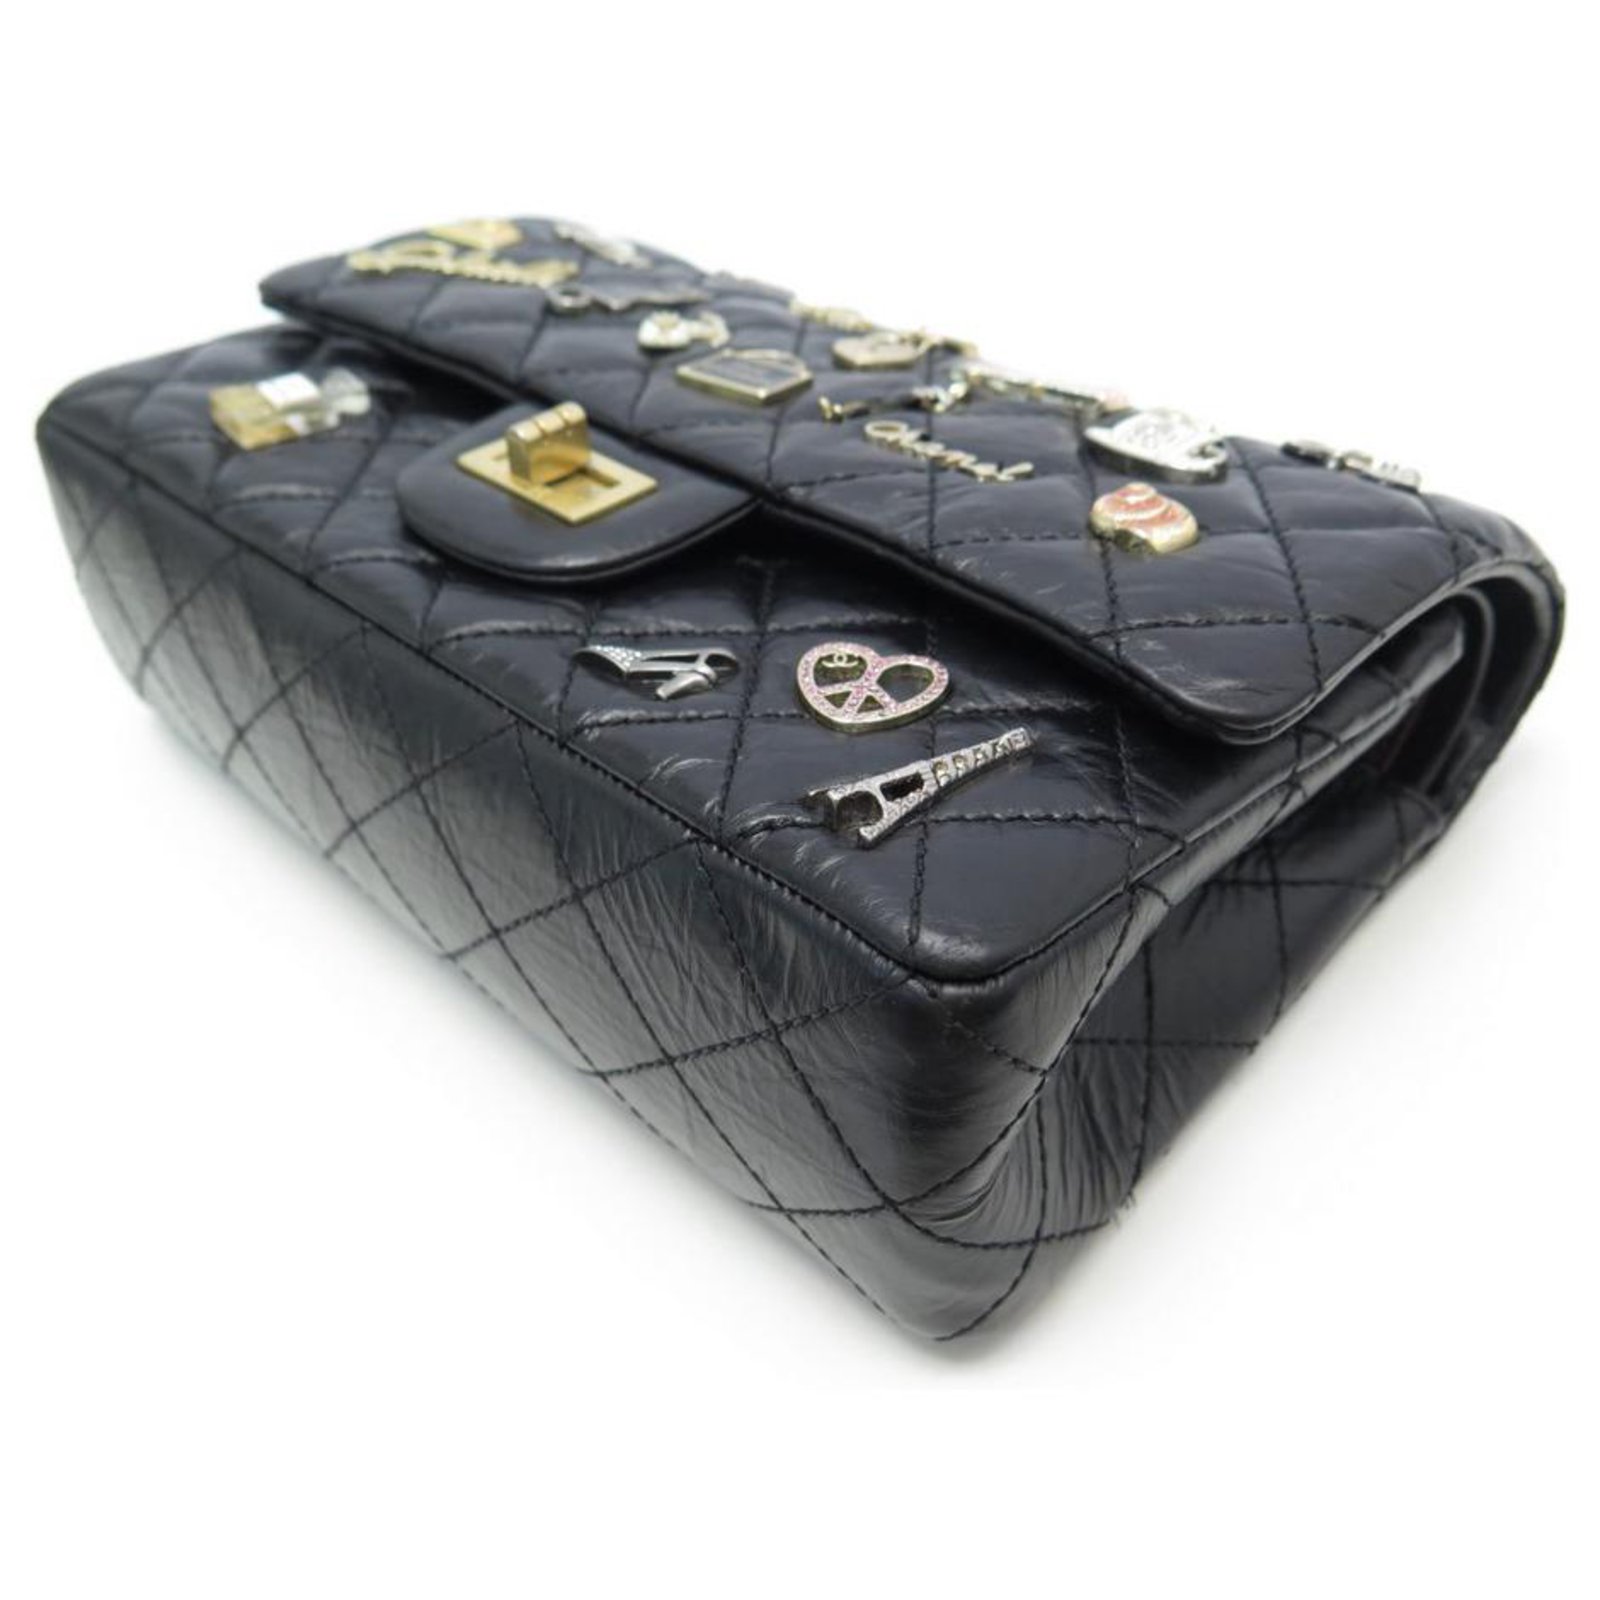 RARE CHANEL HANDBAG 2.55 M LUCKY CHARMS QUILTED LEATHER BANDOULIERE HAND BAG  Black ref.311411 - Joli Closet